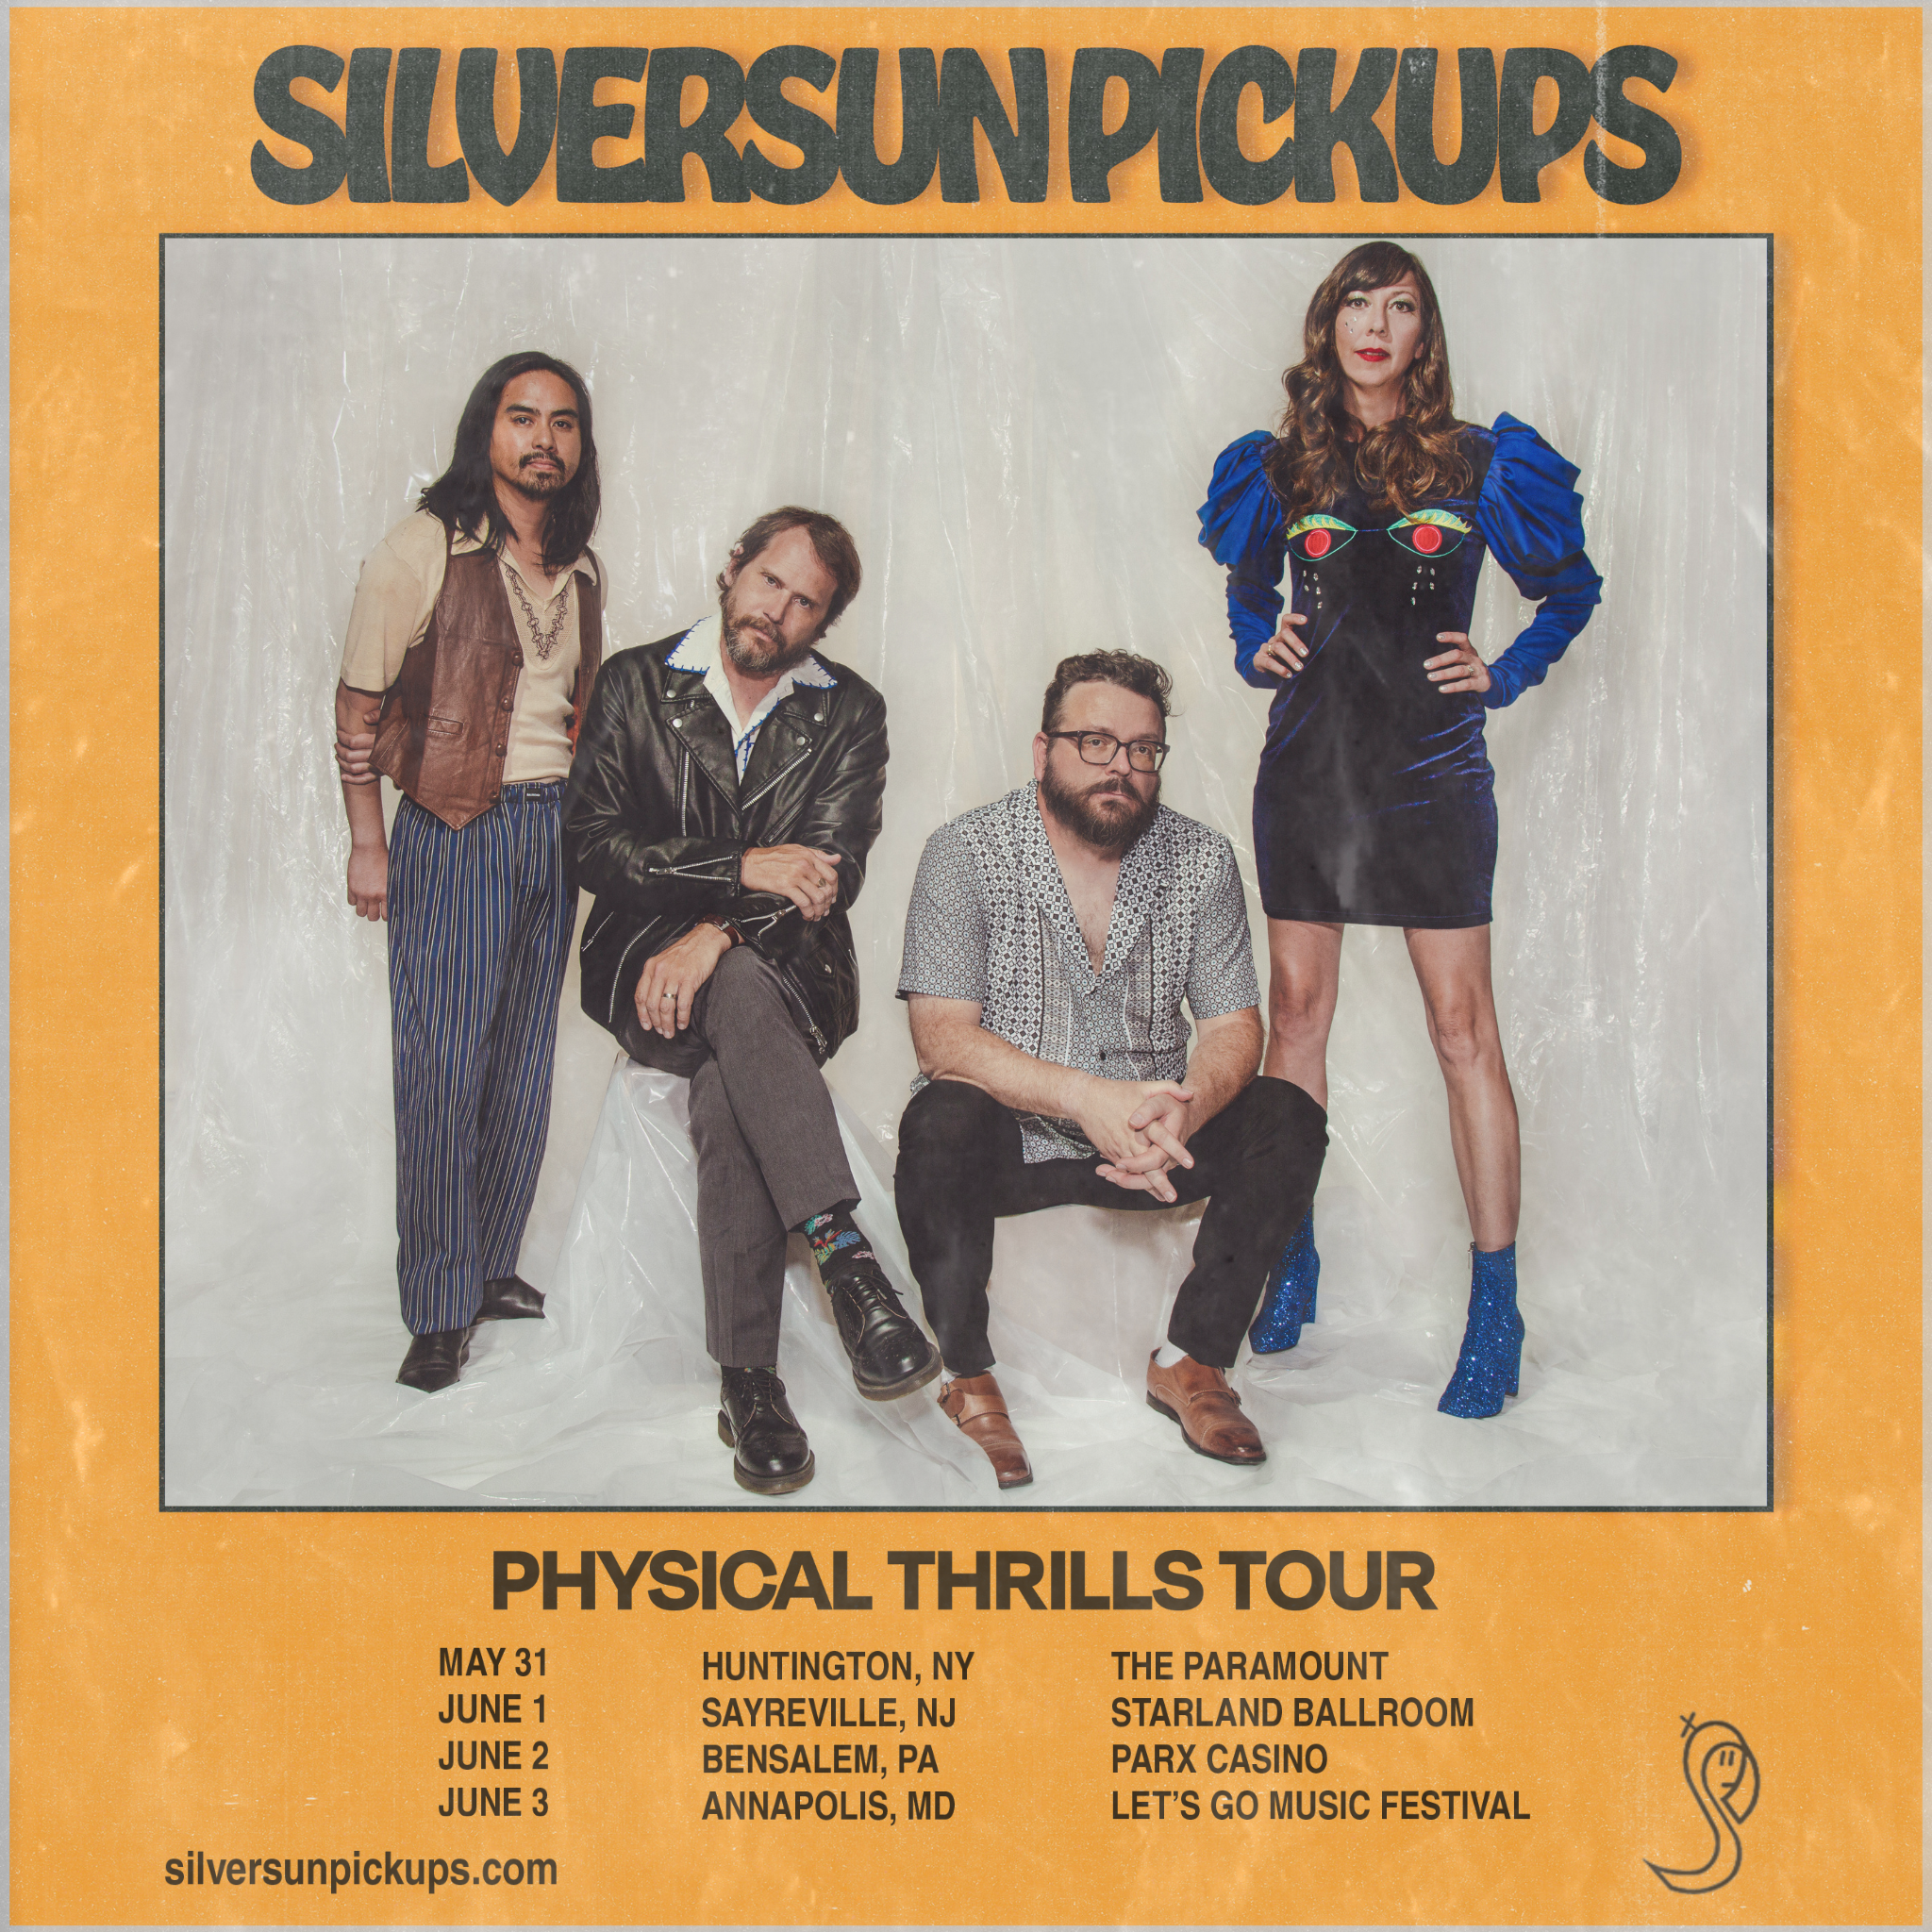 New Physical Thrills Tour Dates